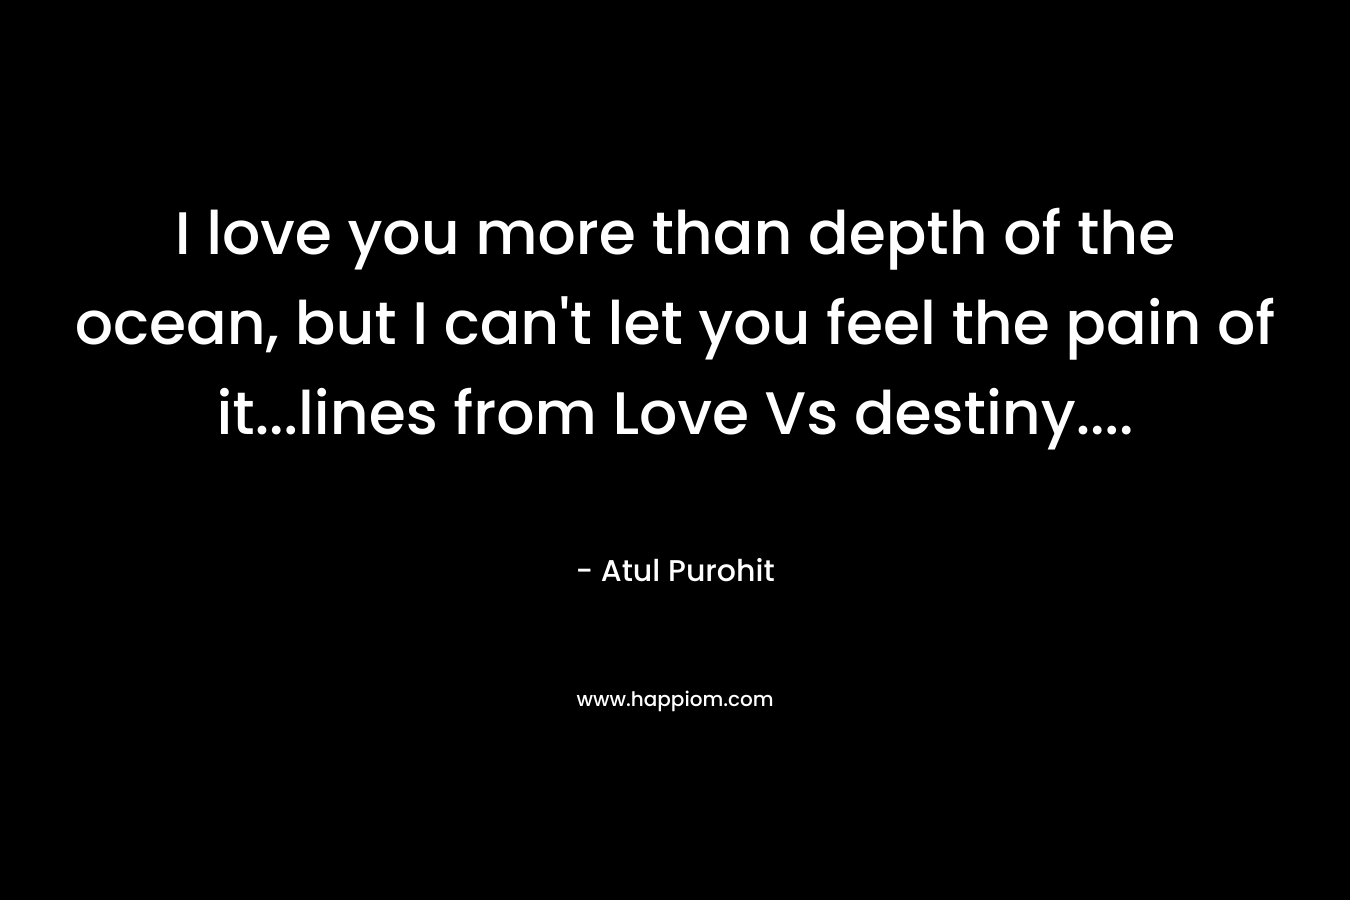 I love you more than depth of the ocean, but I can't let you feel the pain of it...lines from Love Vs destiny....